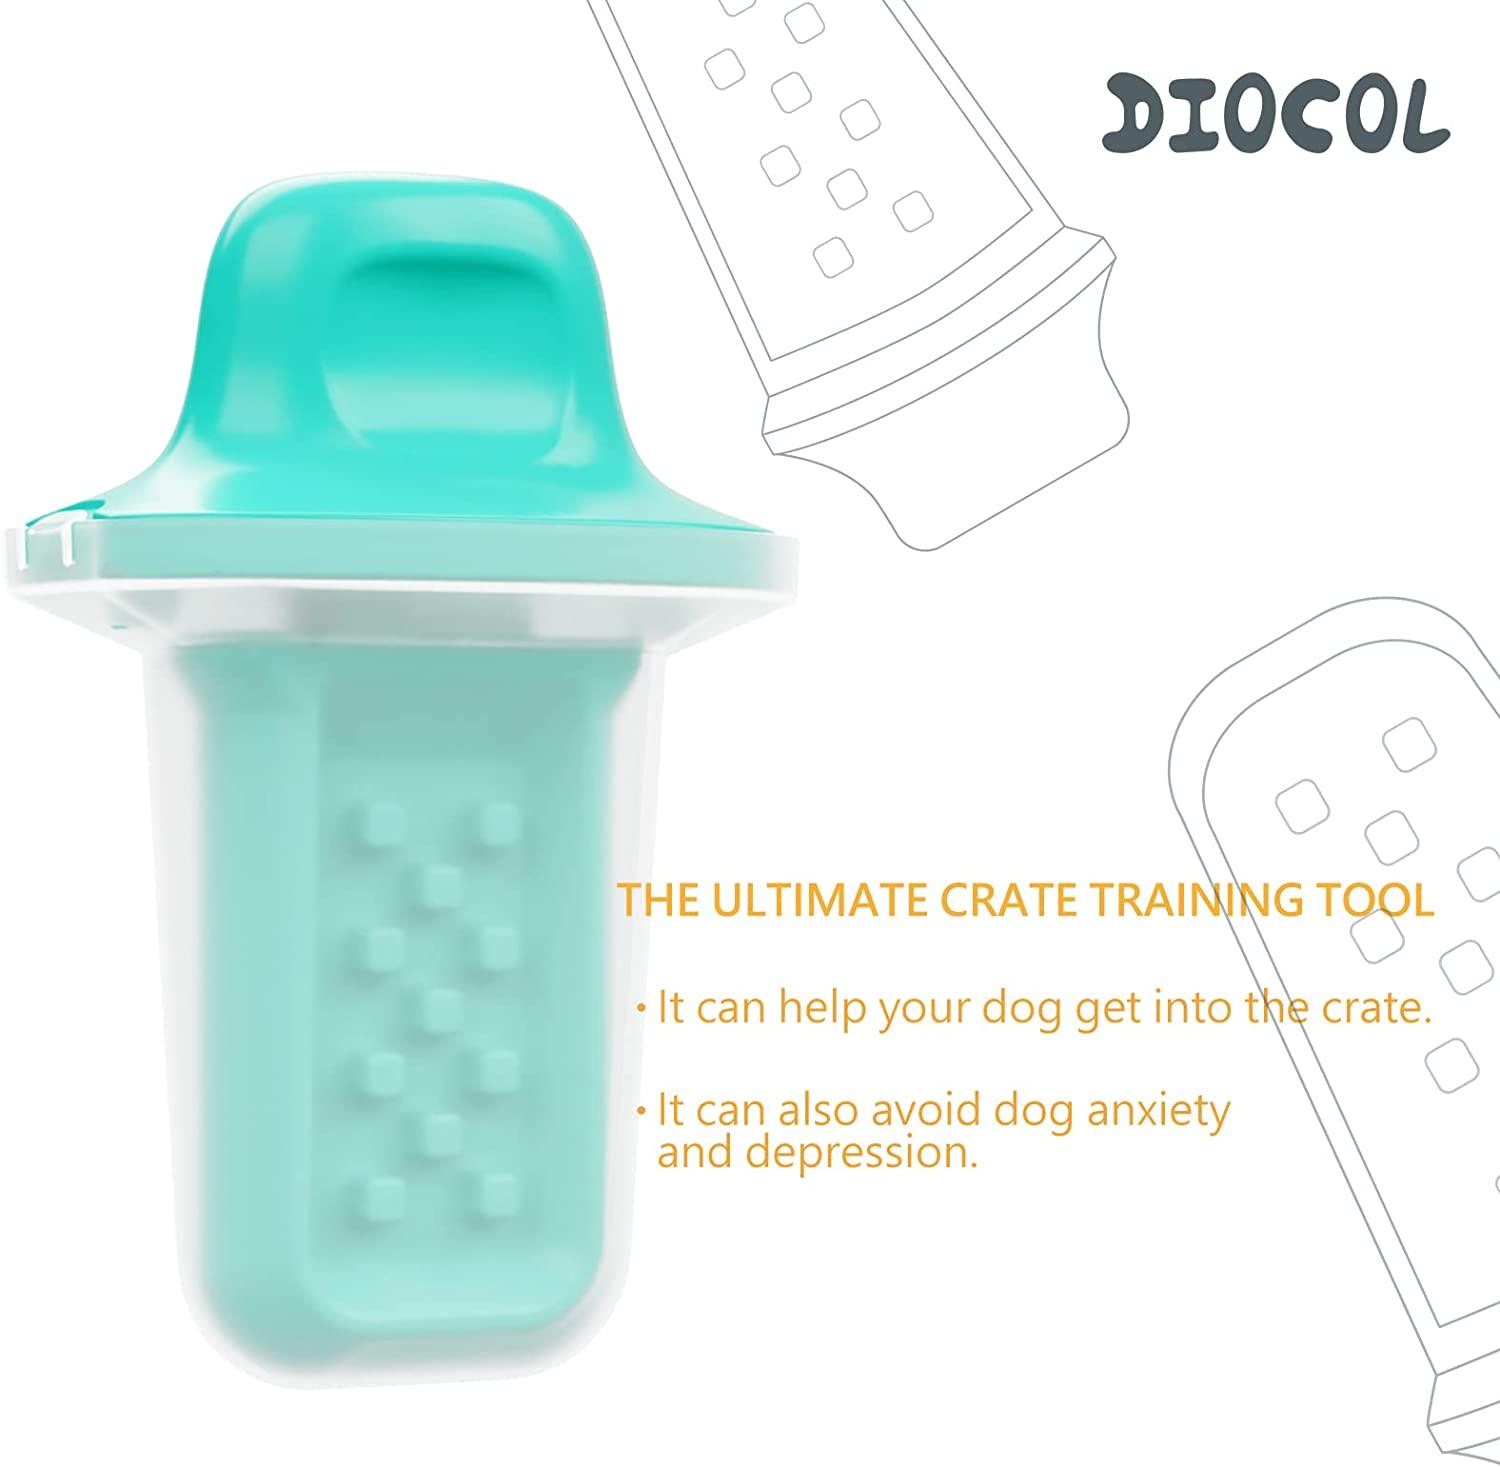 DIOCOL Dog Training Toys/Aids, Dog Peanut Butter Toy for Crate